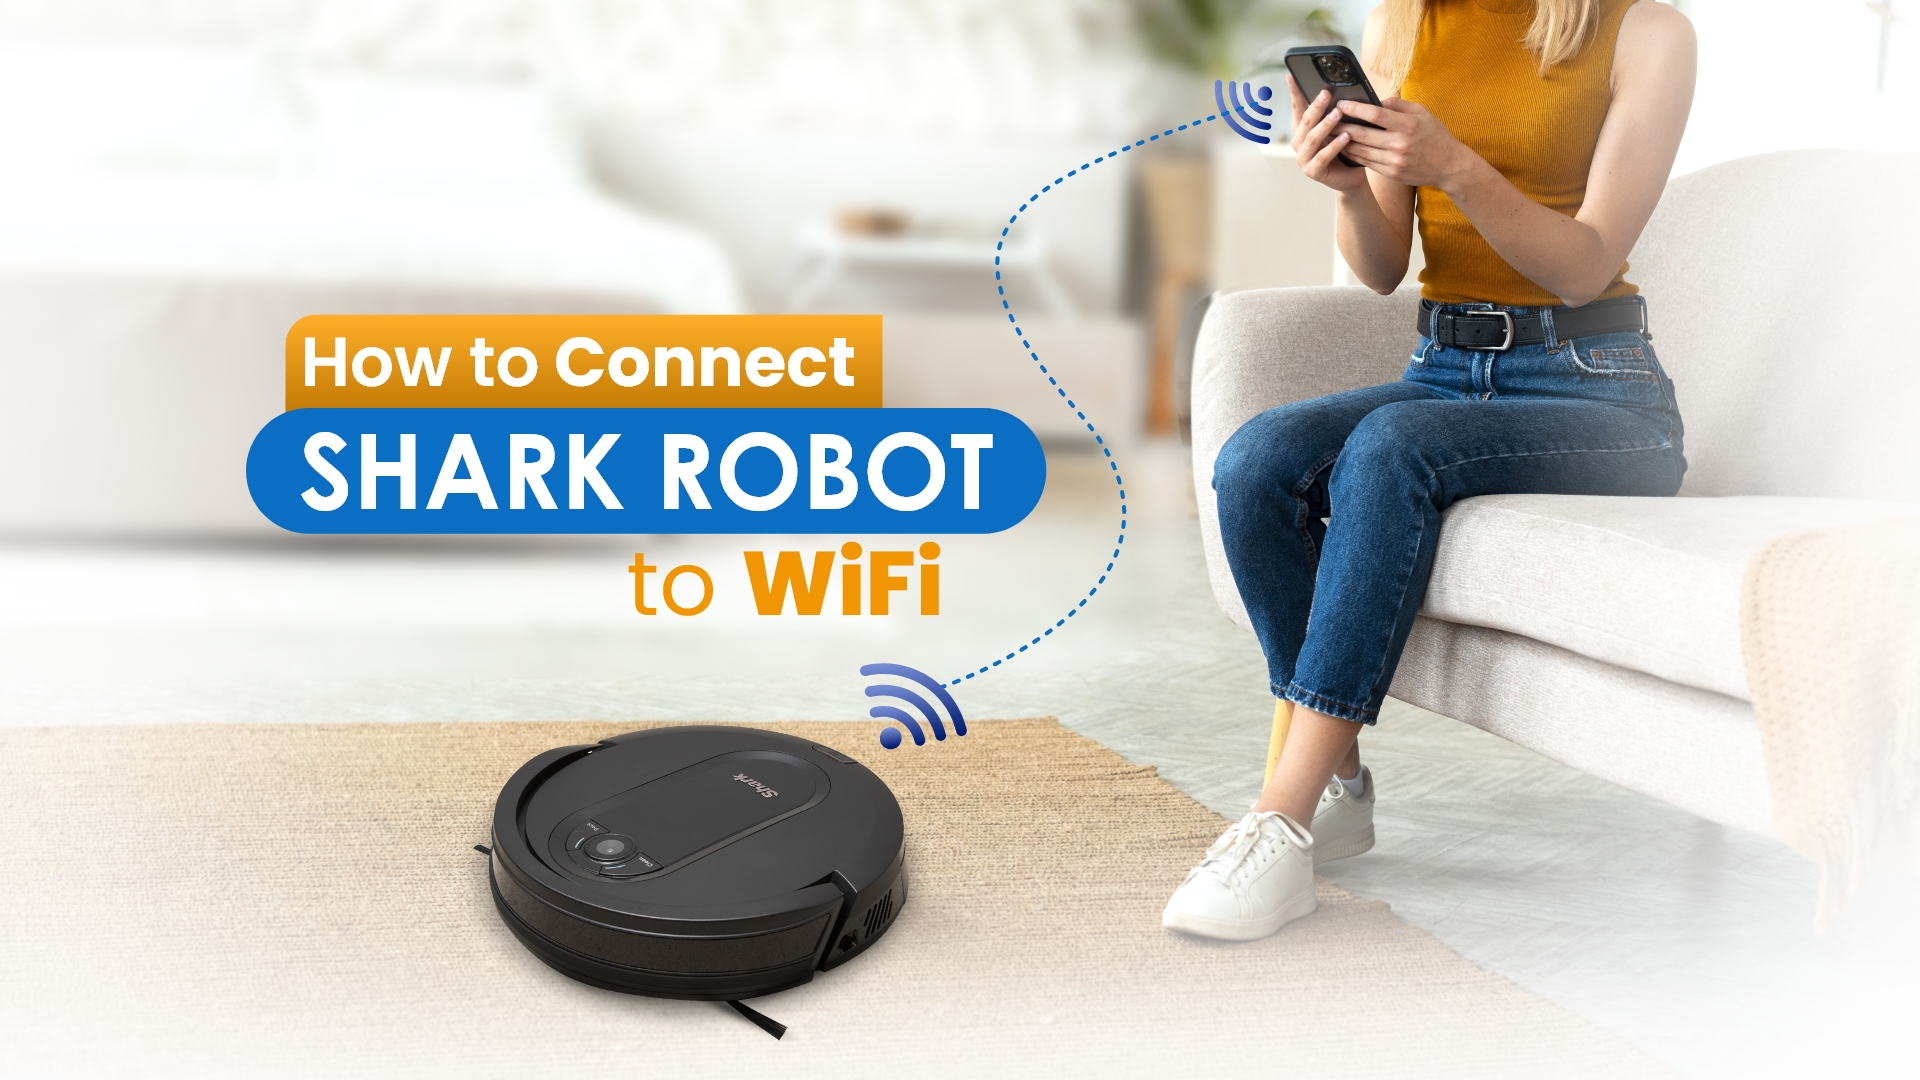 How to Connect Shark Robot to WiFi – Full Guide